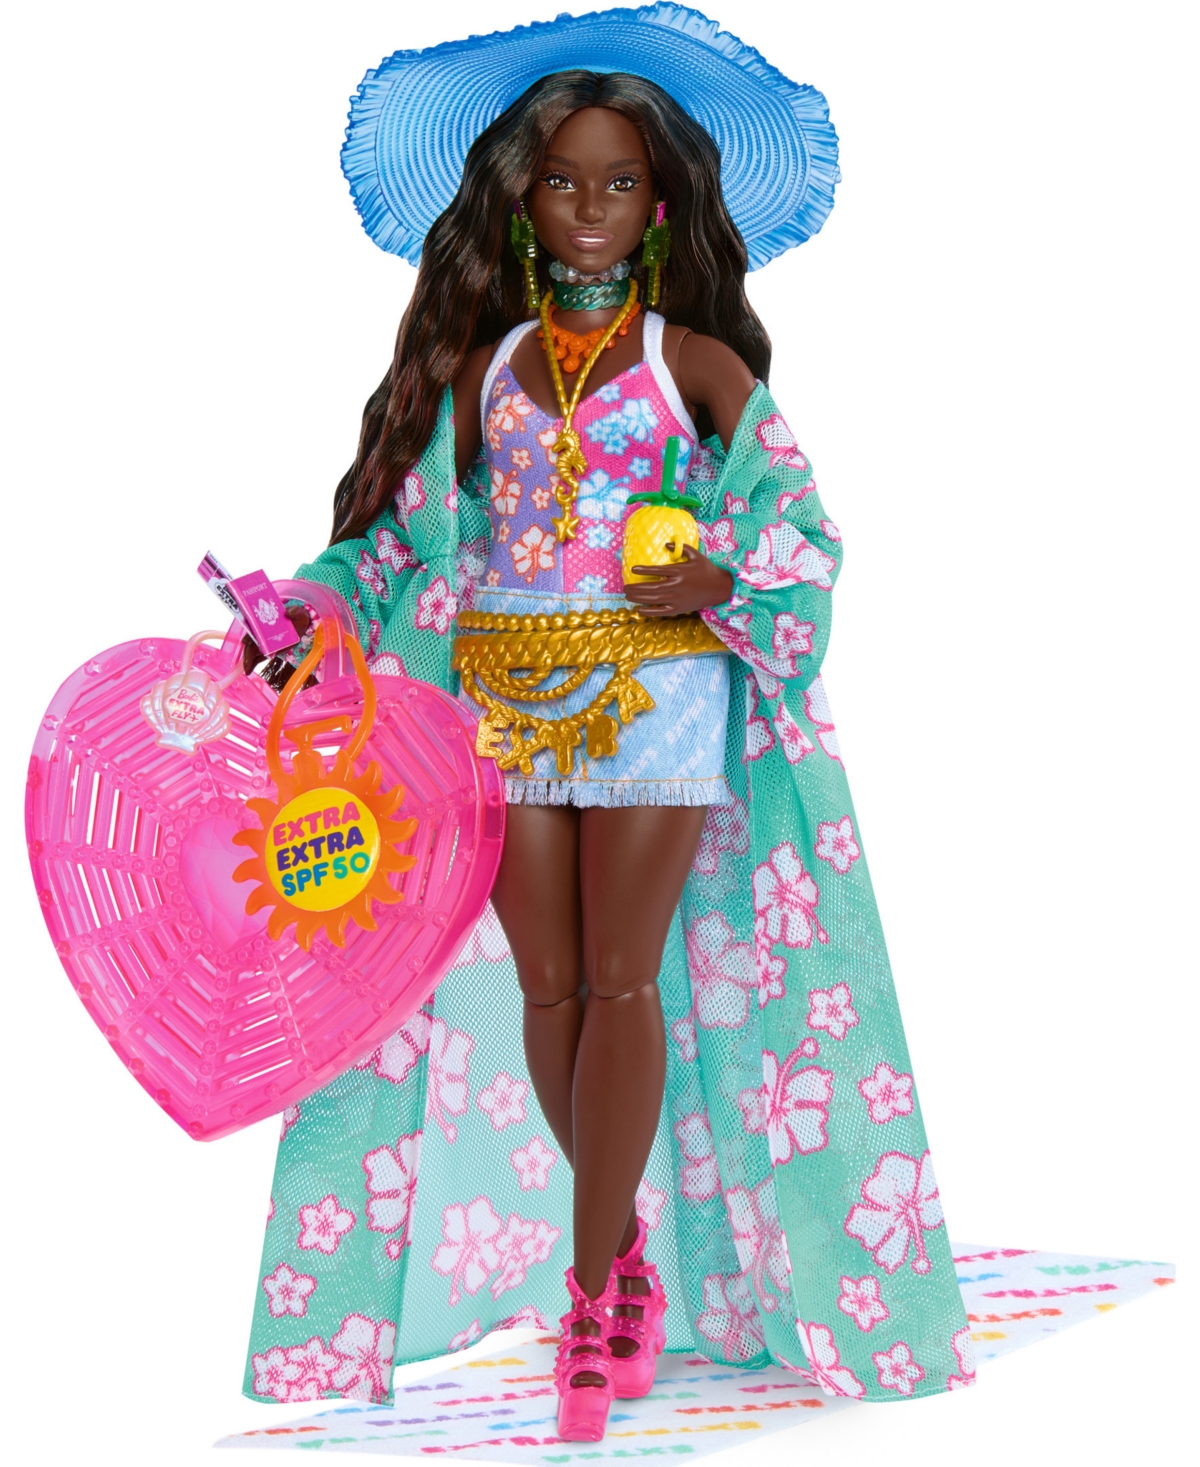 Barbie Kids' Extra Fly Themed Doll In Multi-color